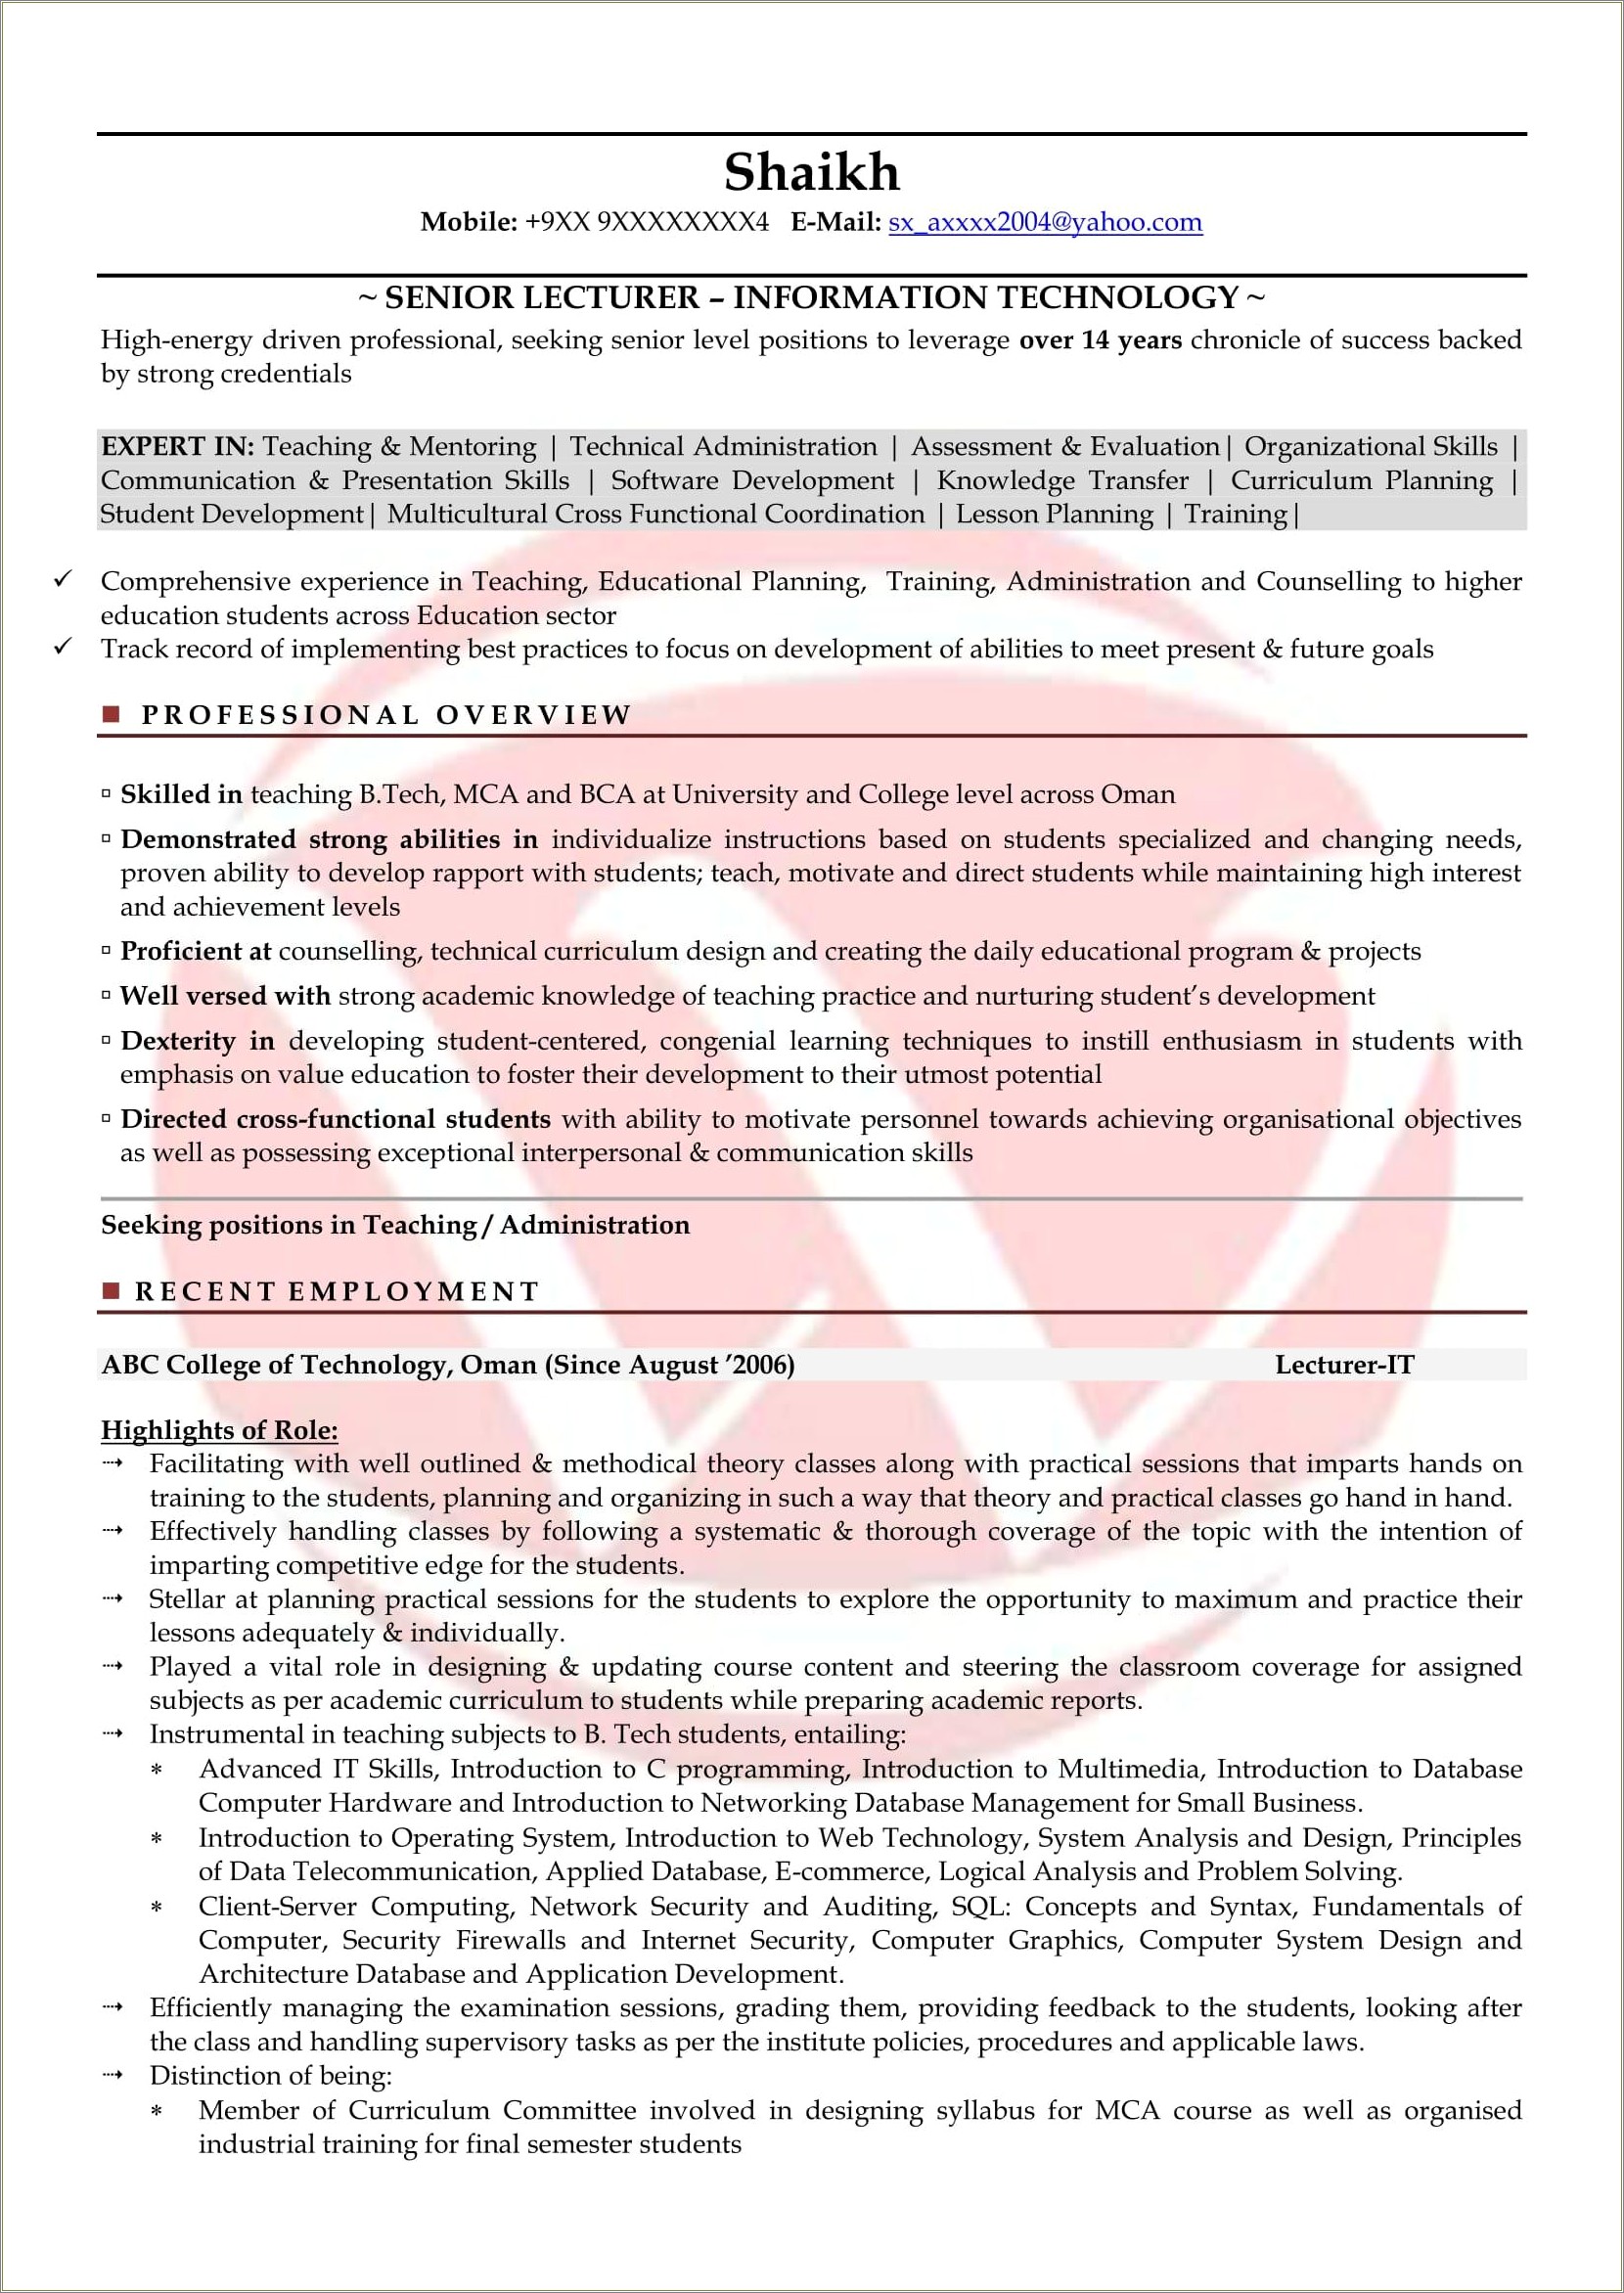 Sample Resume To Apply For Lecturer Post